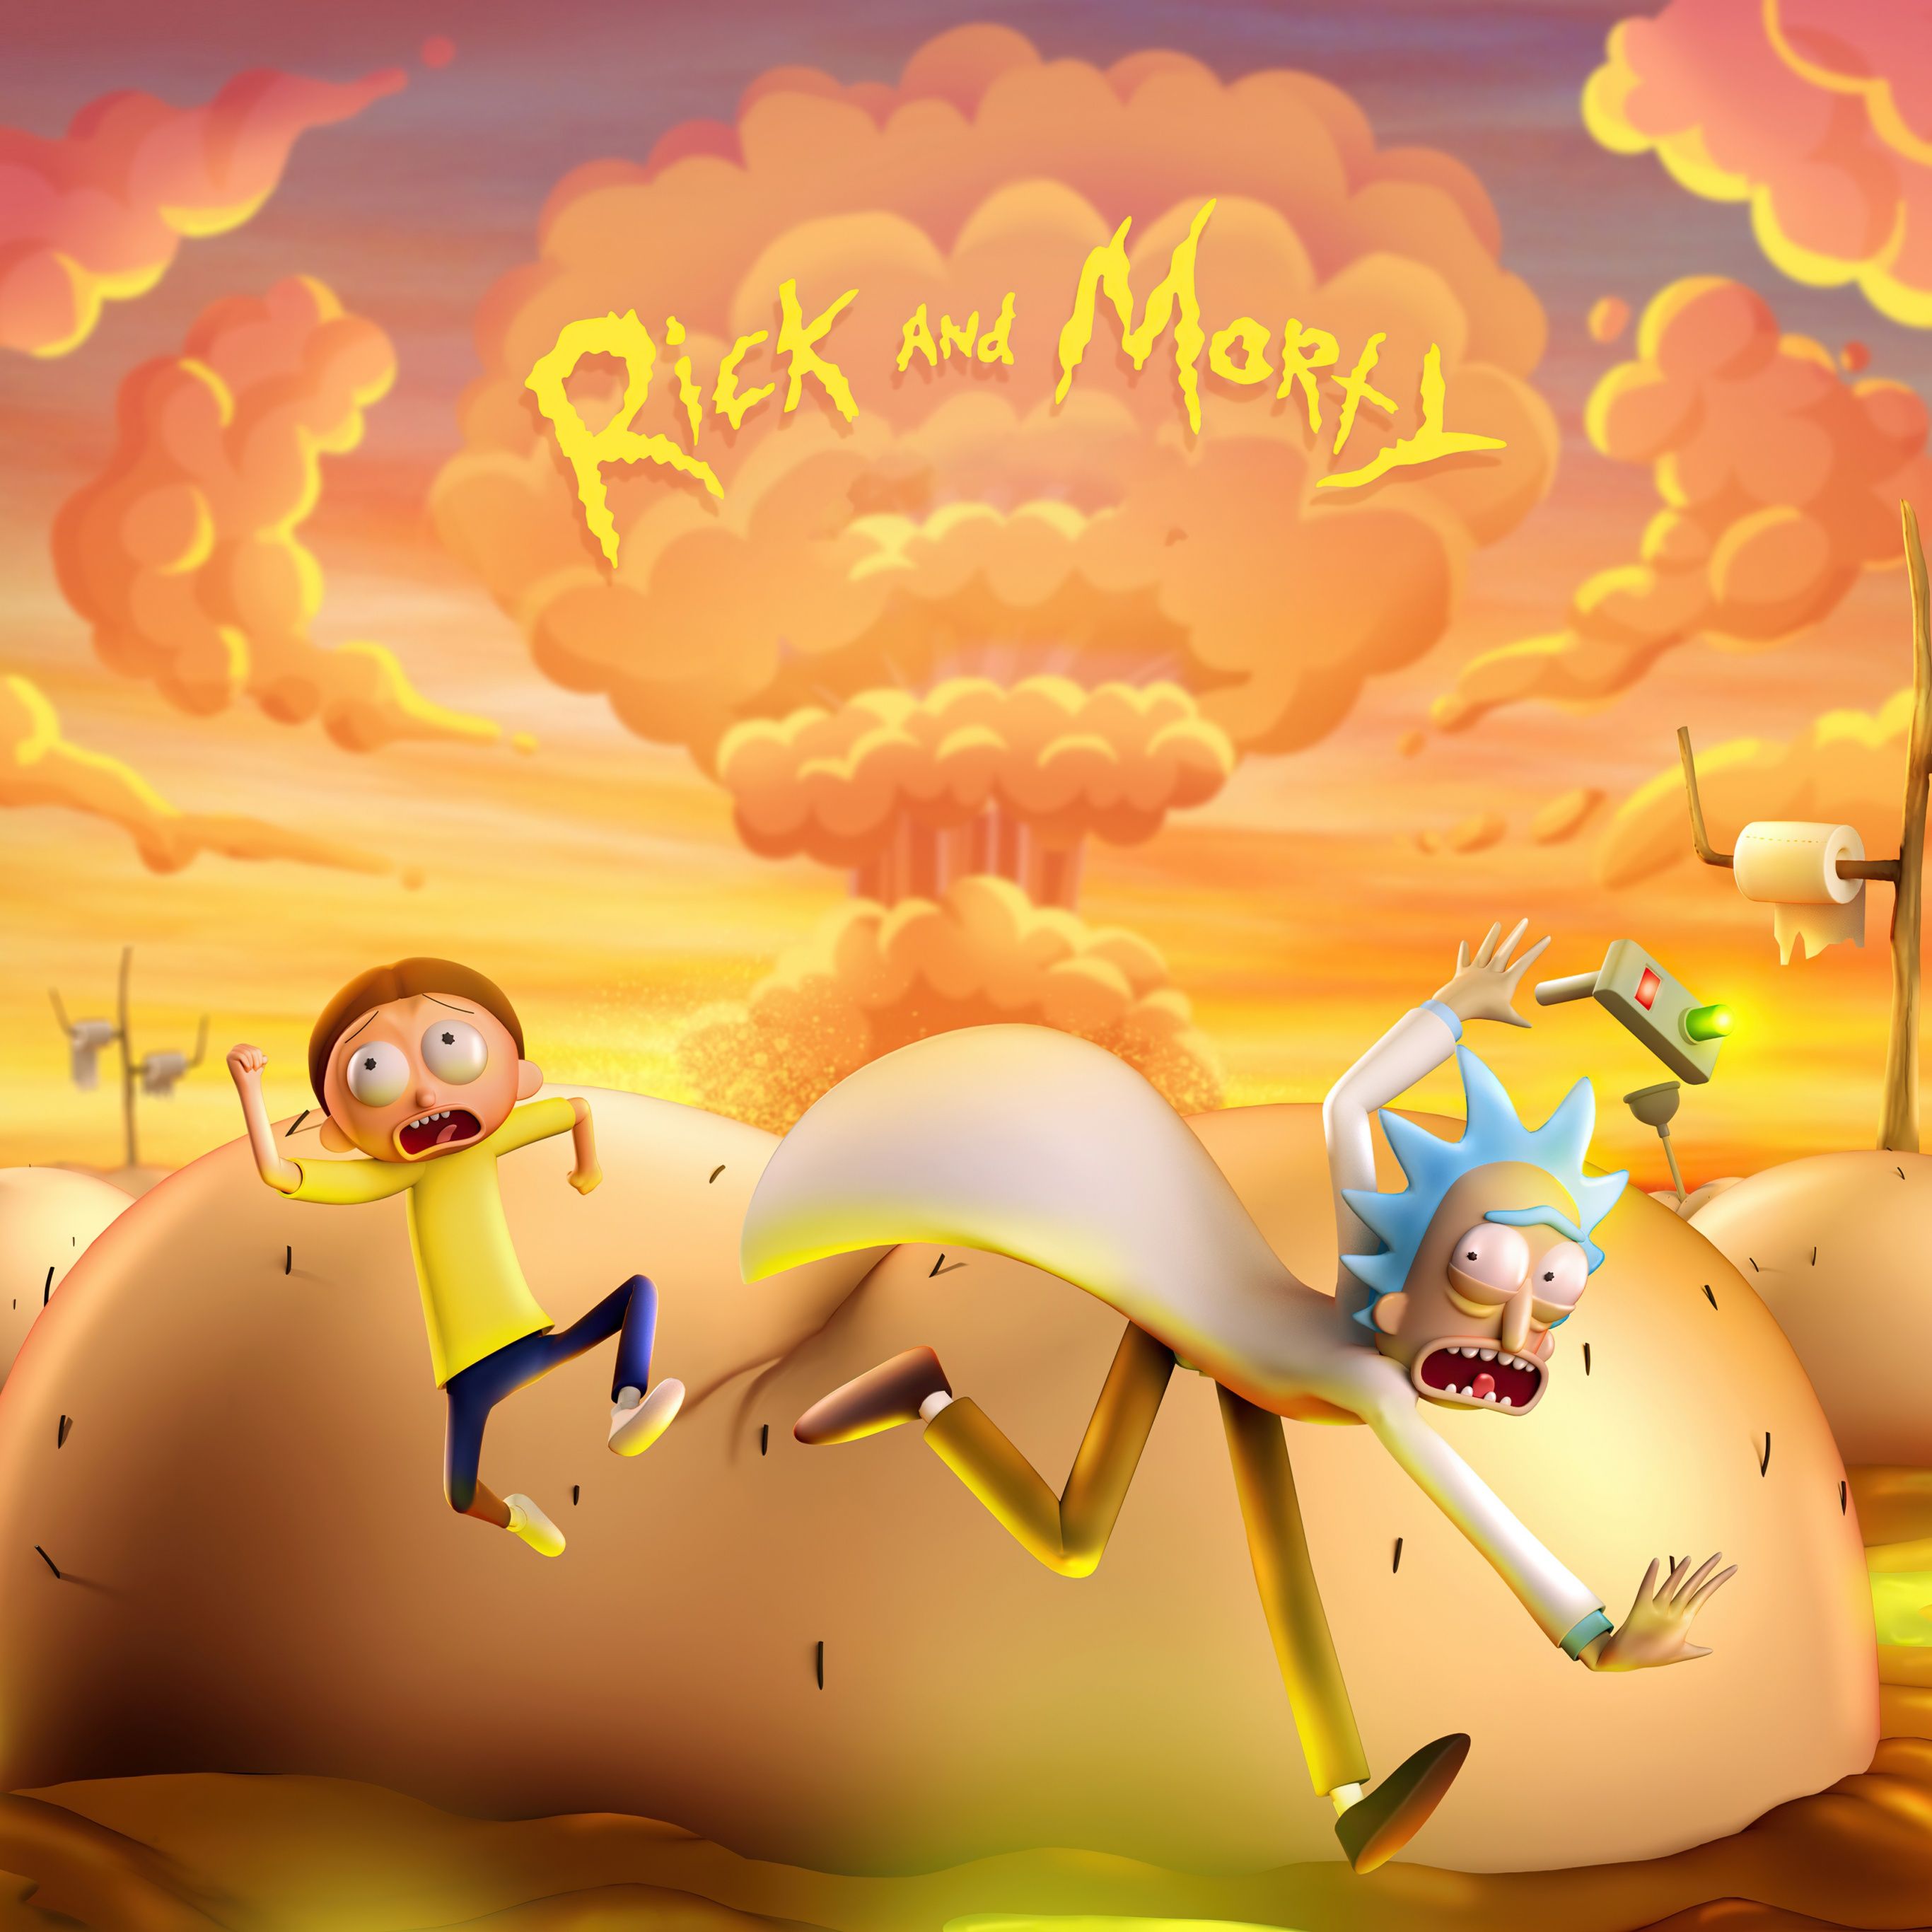 Rick and Morty are two characters from a popular animated series. - Rick and Morty